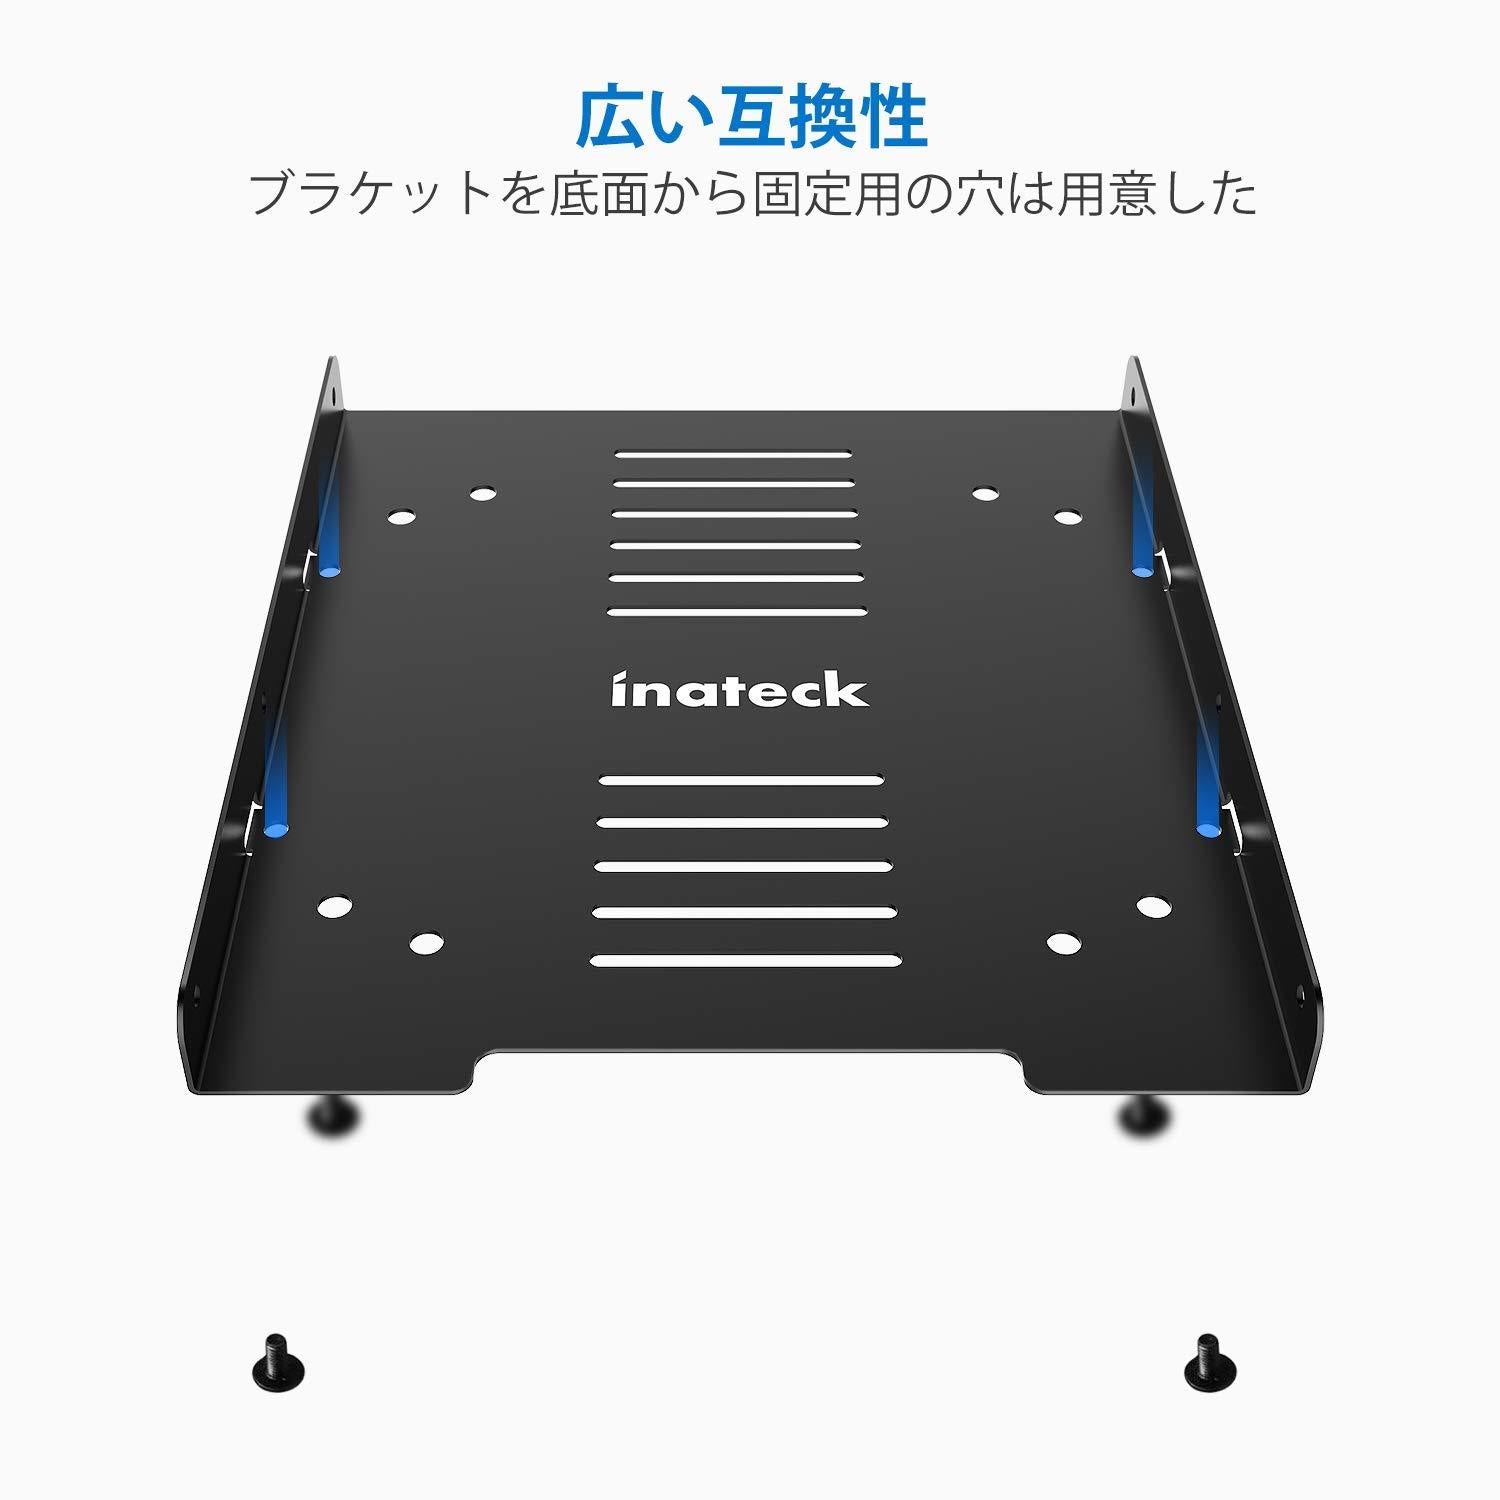 Inateck ST1004 black - Inateckバックパックジャパン